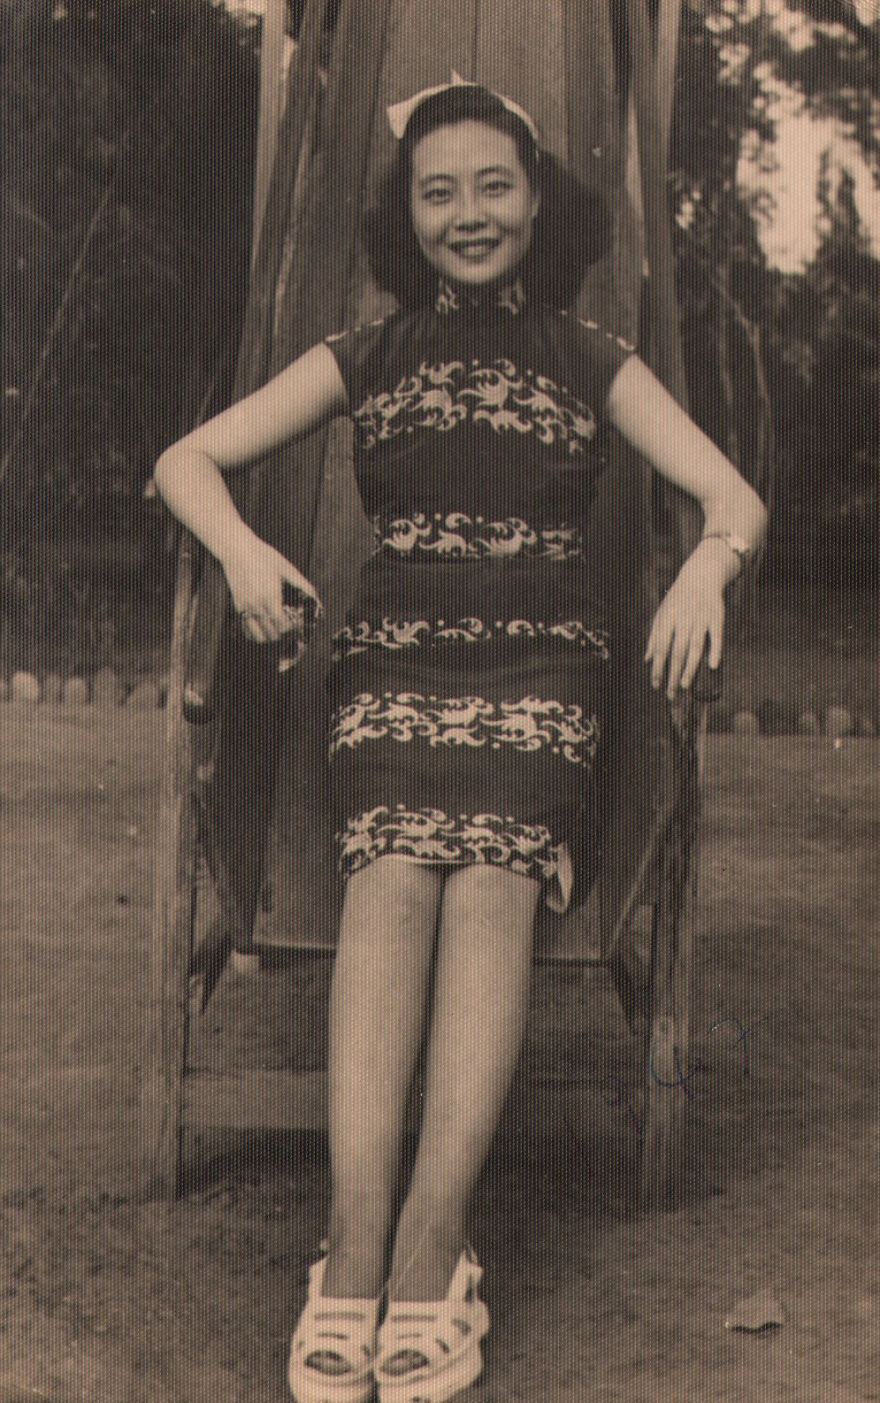 My-late-grandma-left-a-treasure-of-photographs-of-her-life-as-a-pop-singer-and-model-5ebd66b90dc86__880